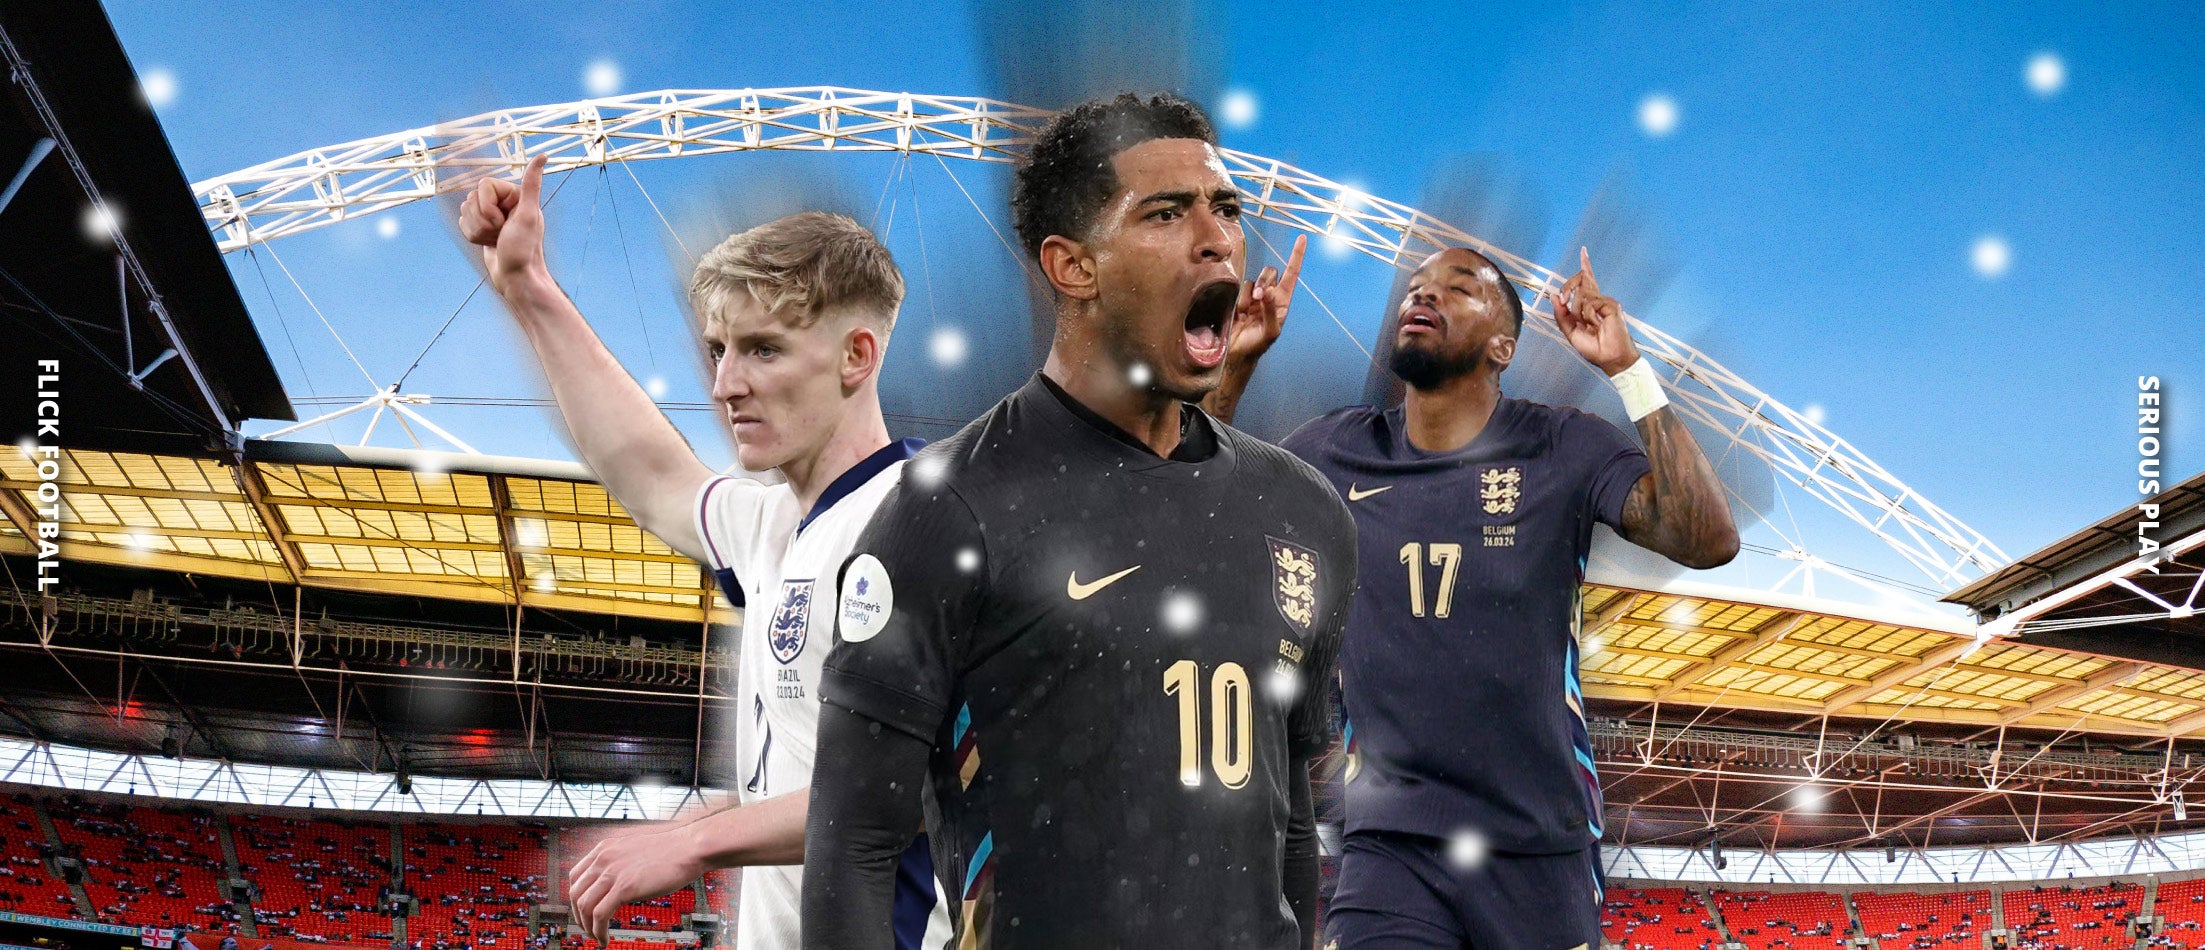 Euros Home Nations Preview- Can England bring it home?